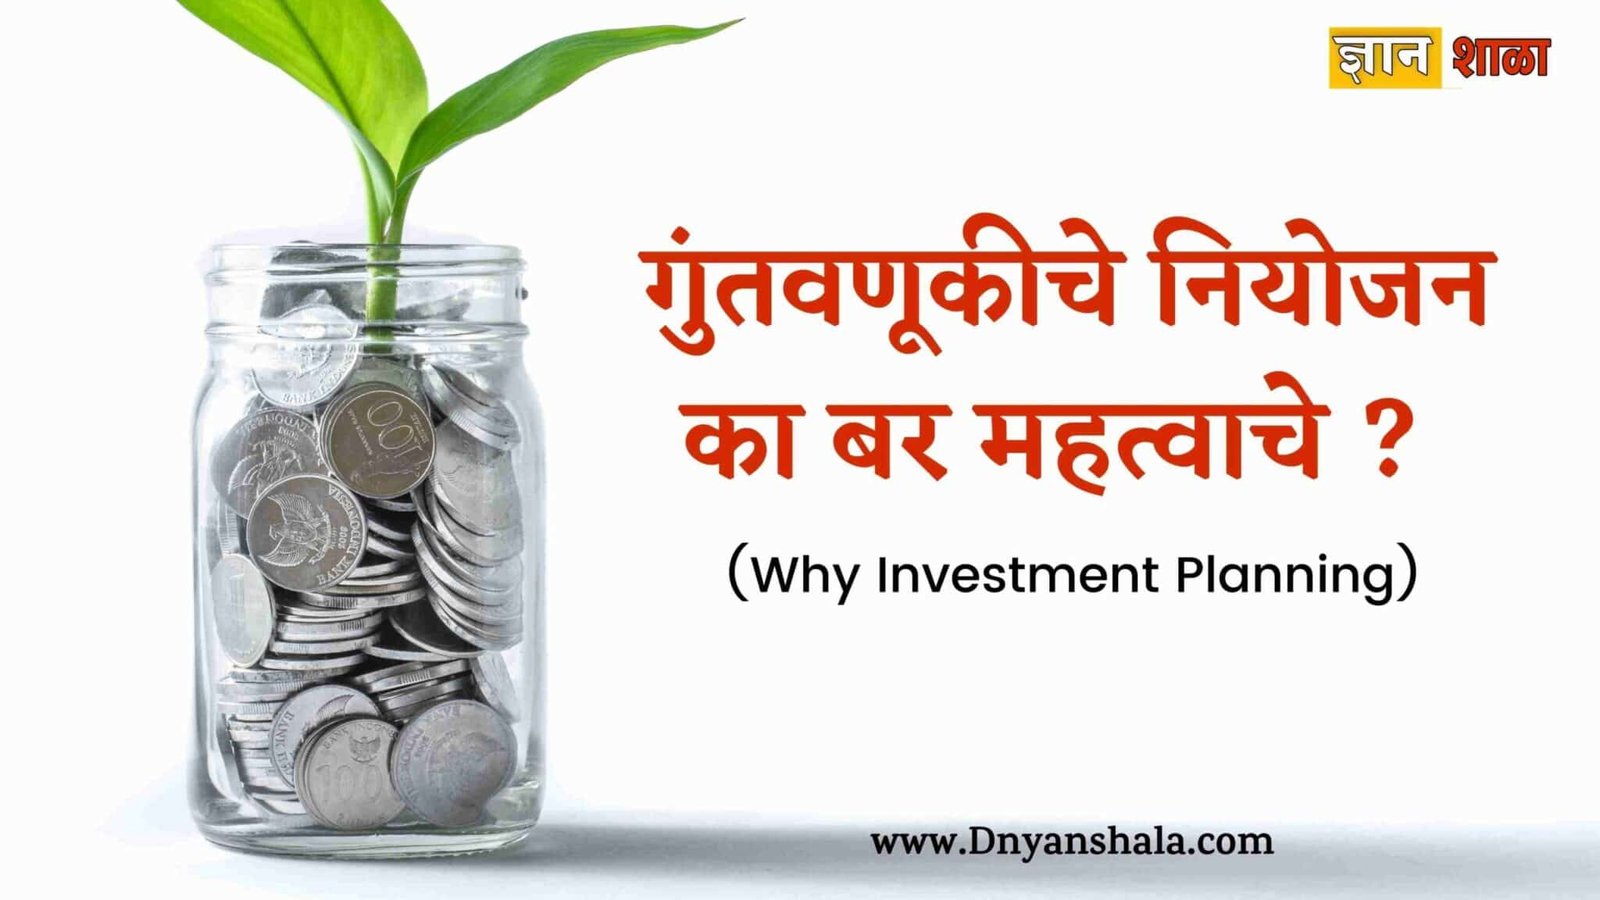 Why Investment Planning information in marathi